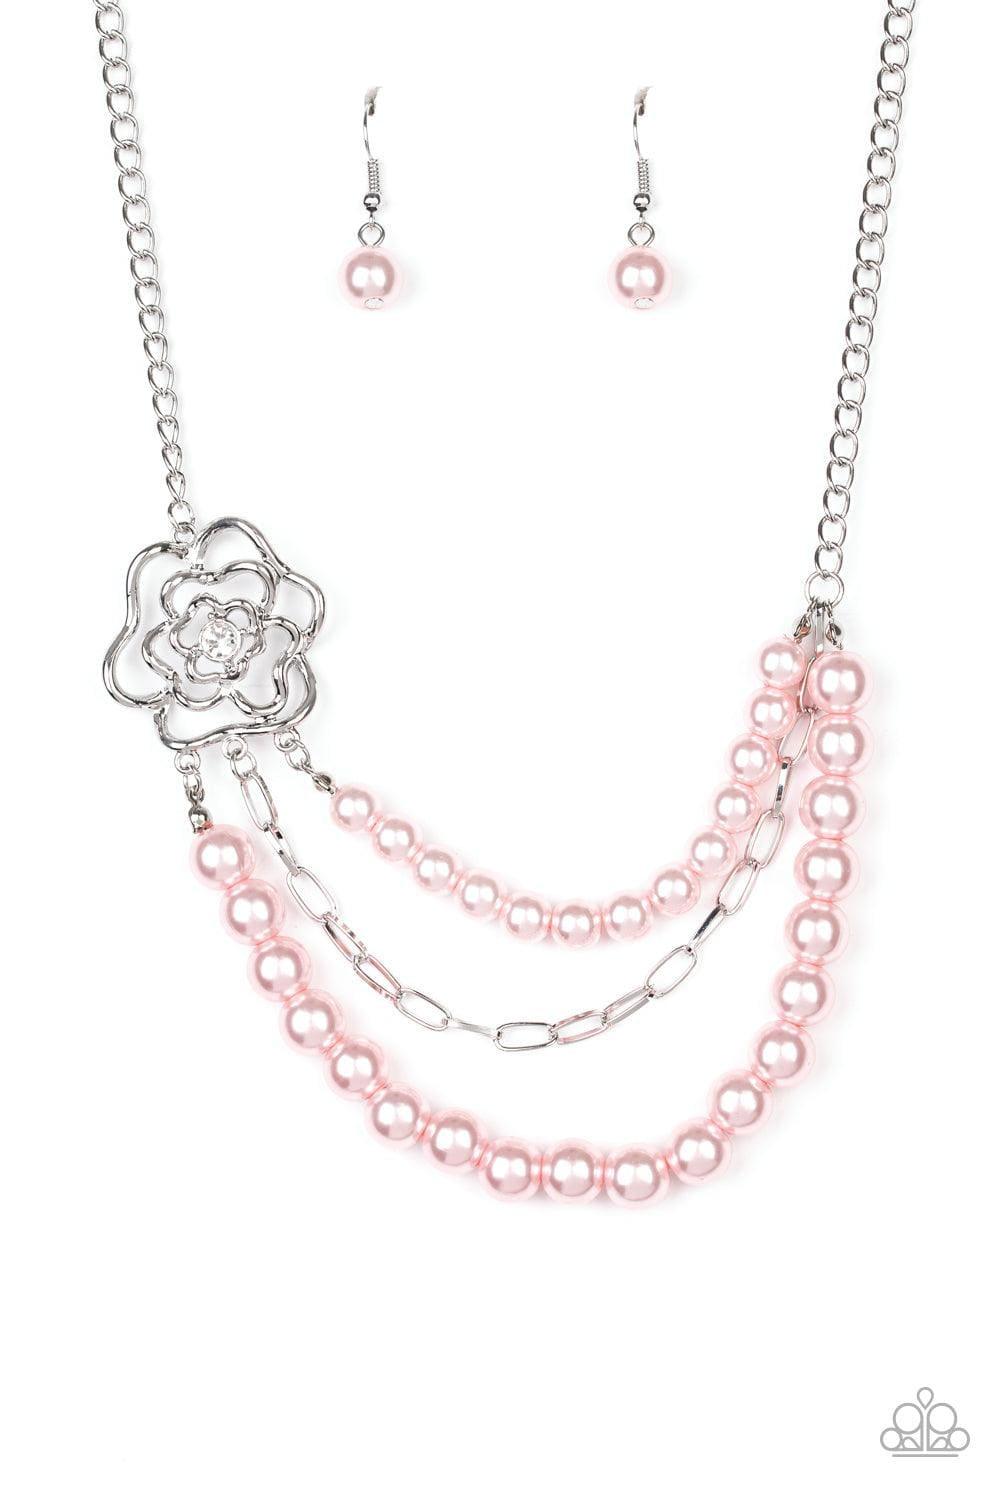 Paparazzi Accessories - Fabulously Floral - Pink Necklace - Bling by JessieK